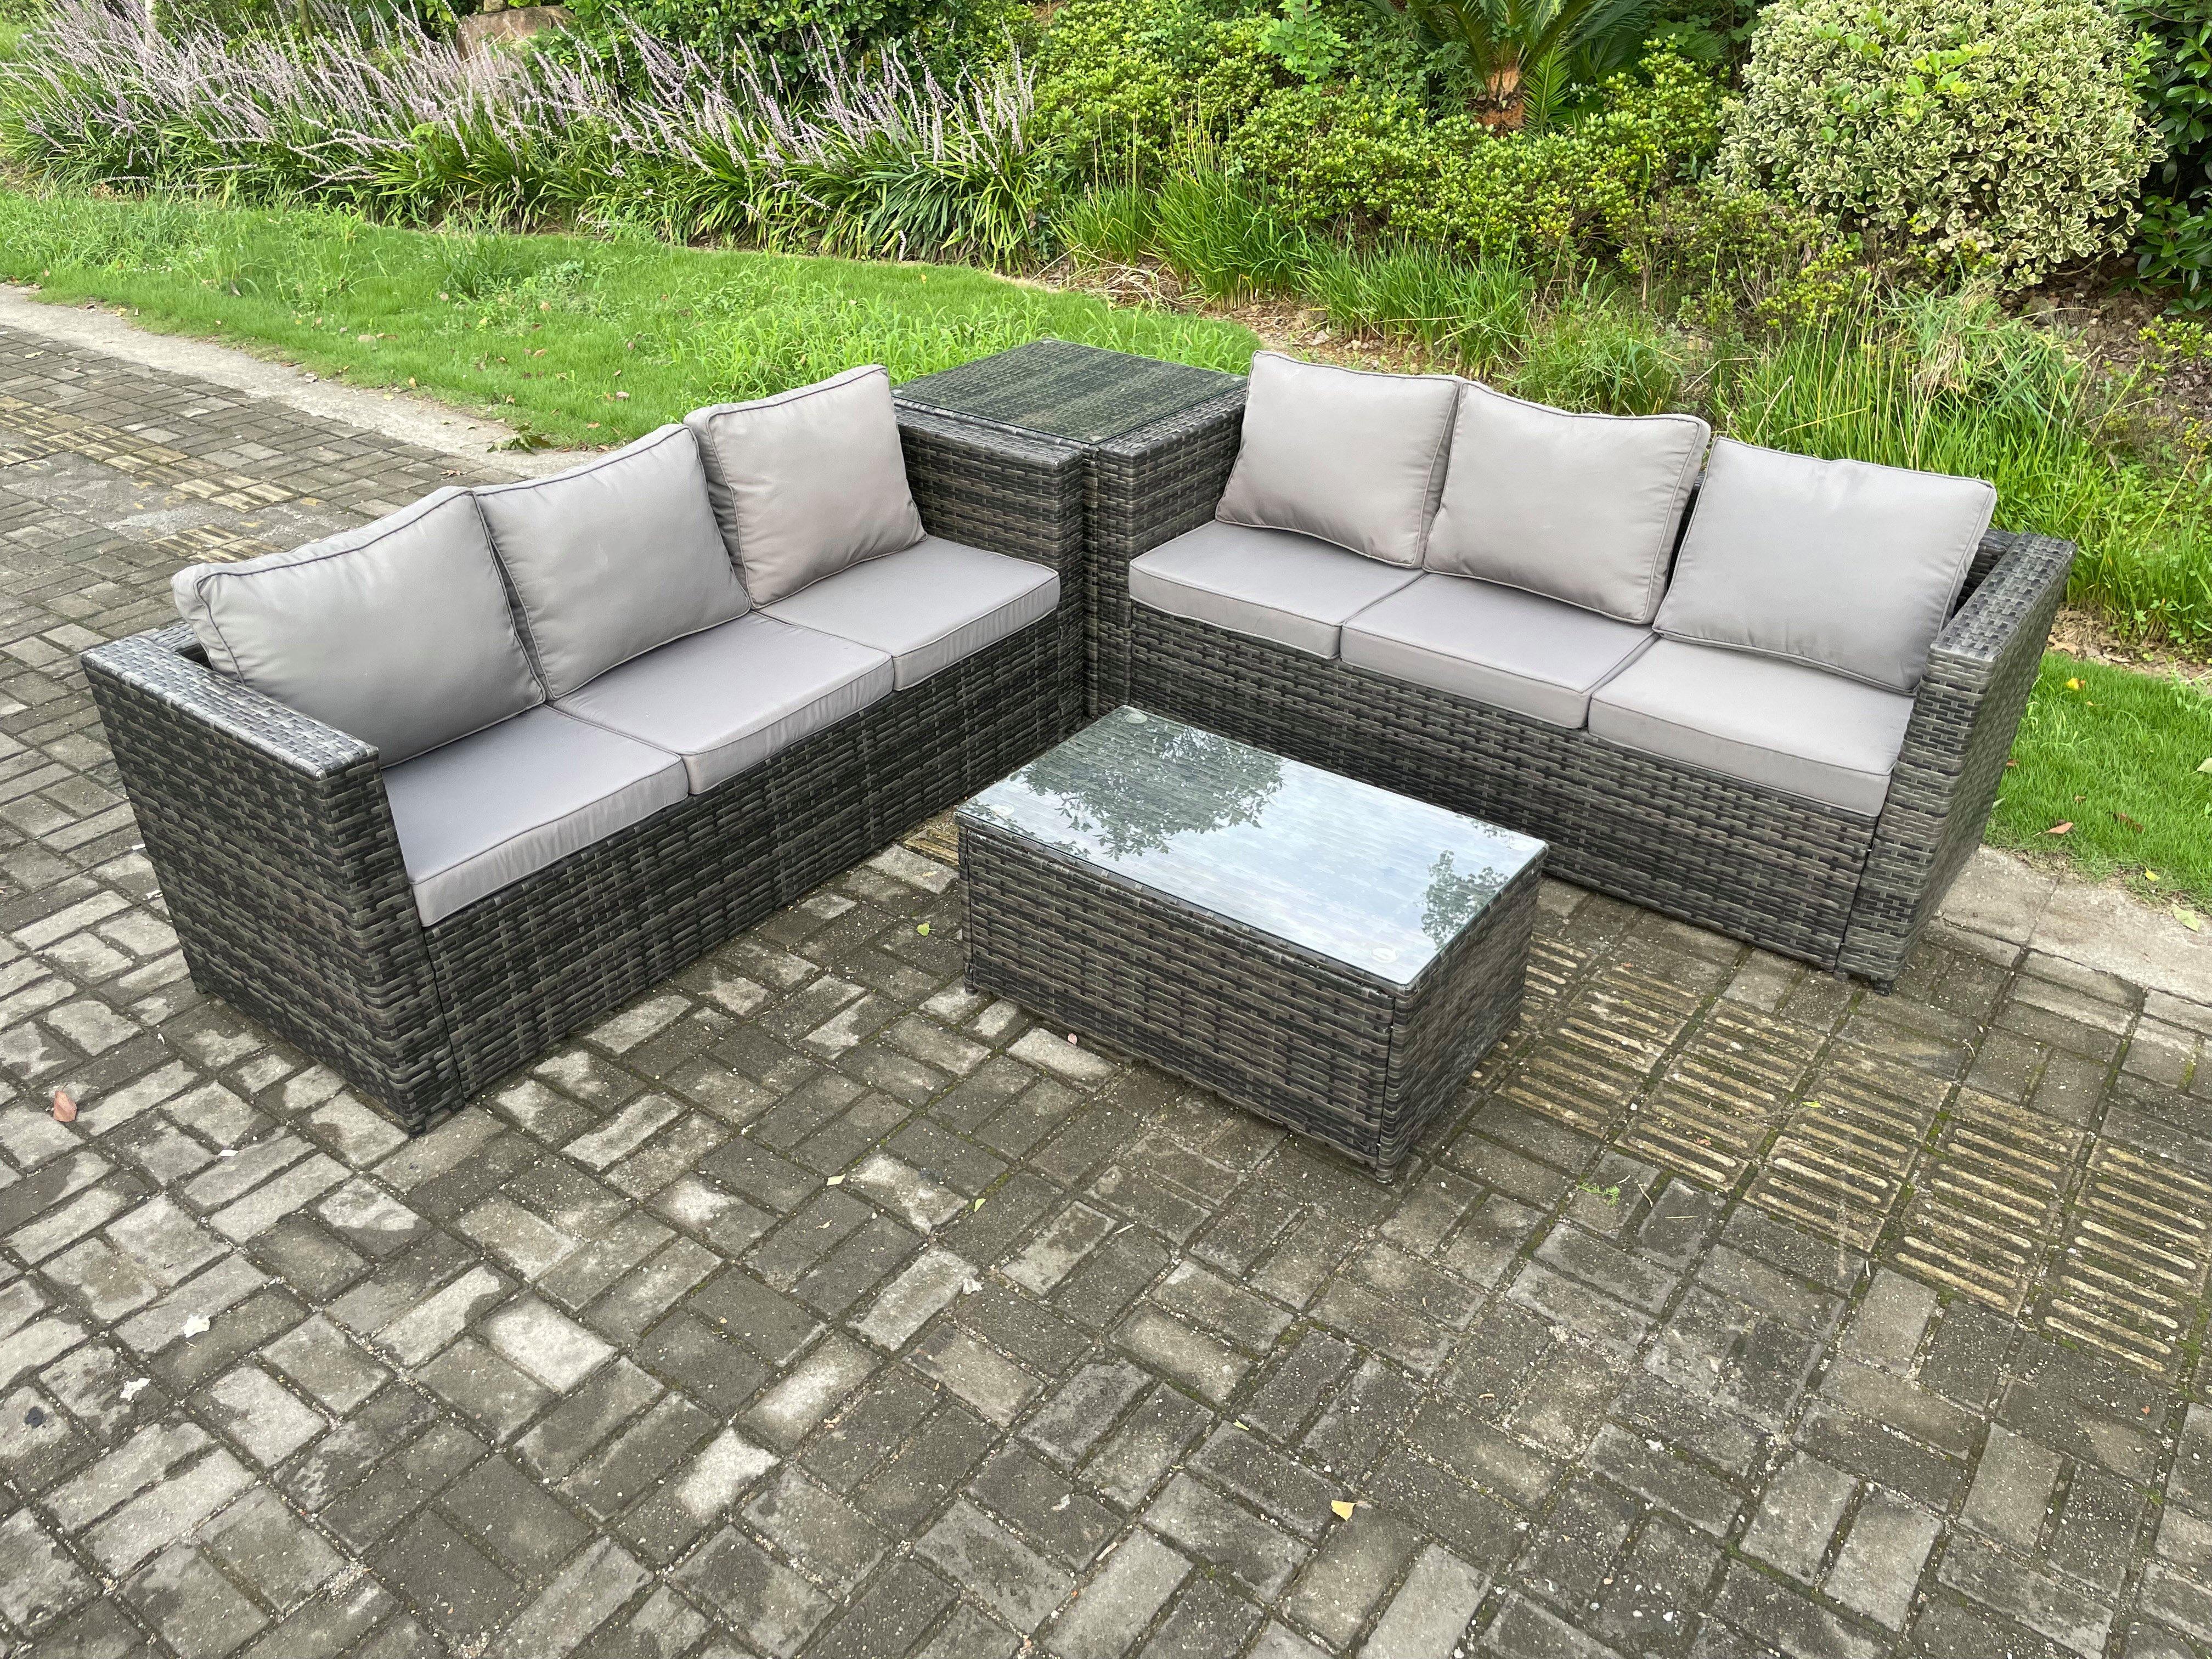 6 Seater Rattan Garden Furniture Set Outdoor Patio Sofa Set with Oblong Coffee Table Side Table Dark